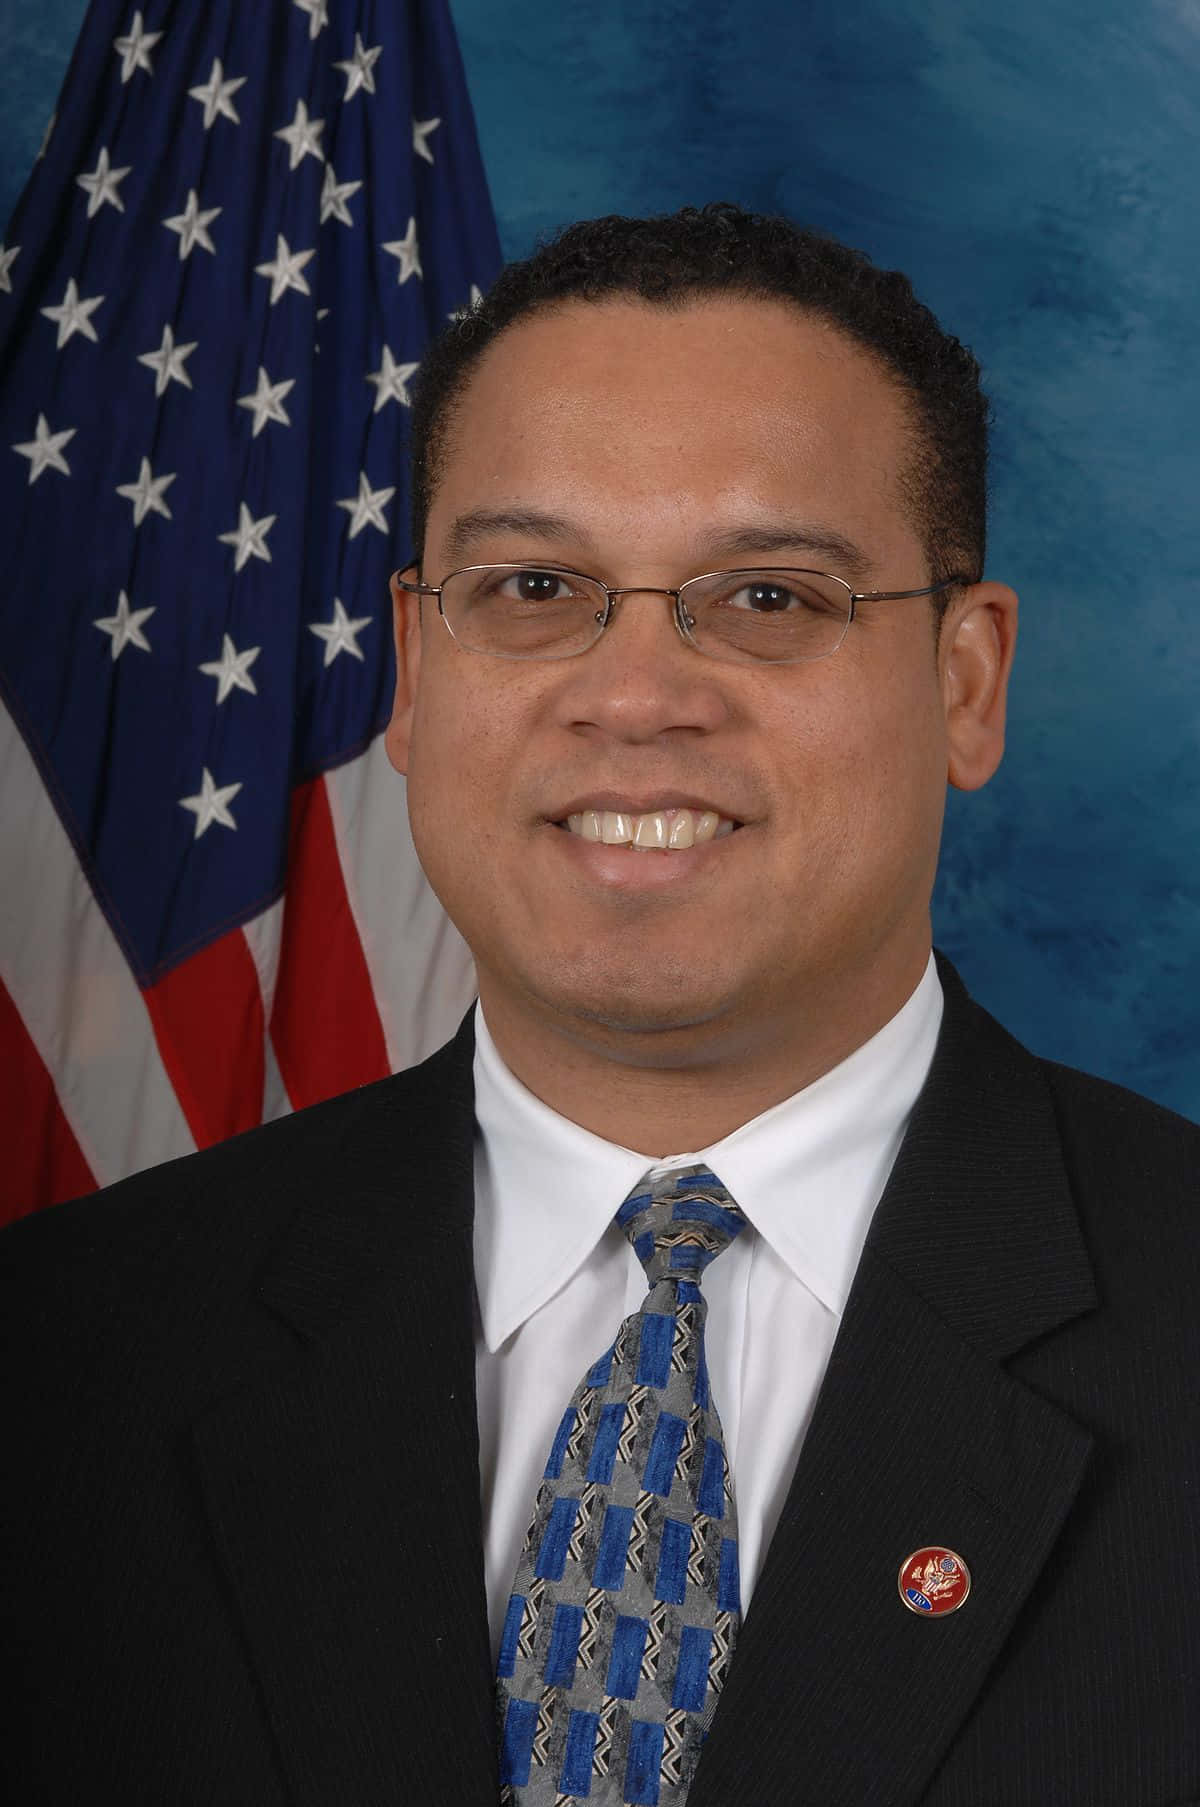 Keith Ellison With American Flag Wallpaper